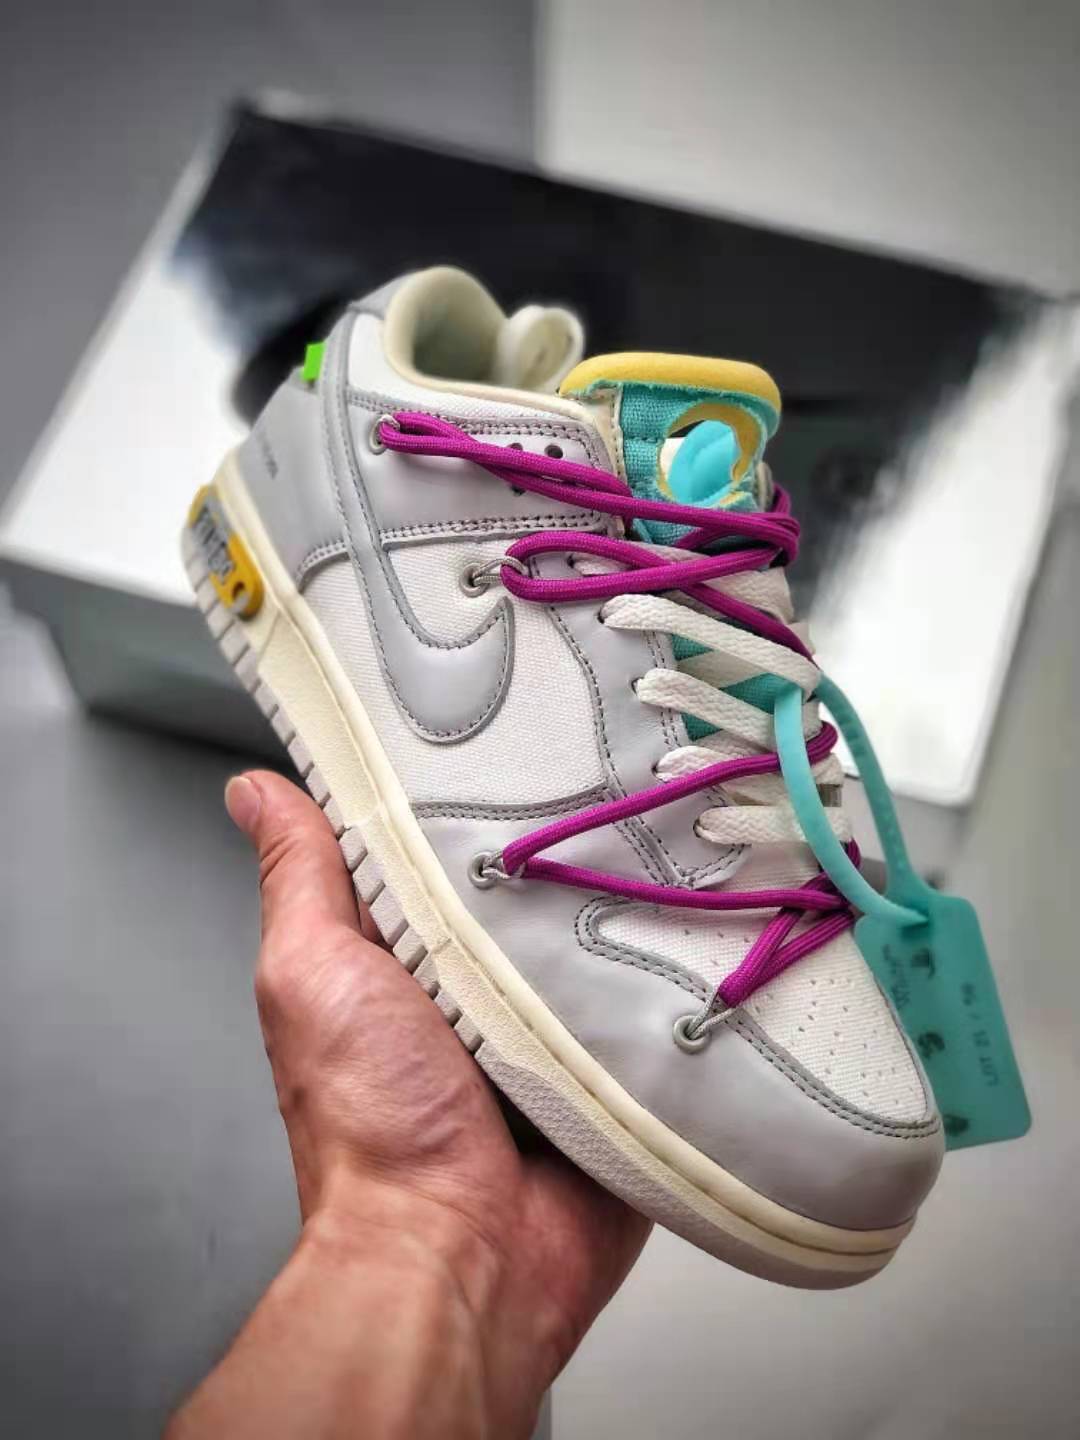 Nike Off-White x Dunk Low 'Lot 21 of 50' DM1602-100 – Exclusive Limited Edition for Sneaker Collectors